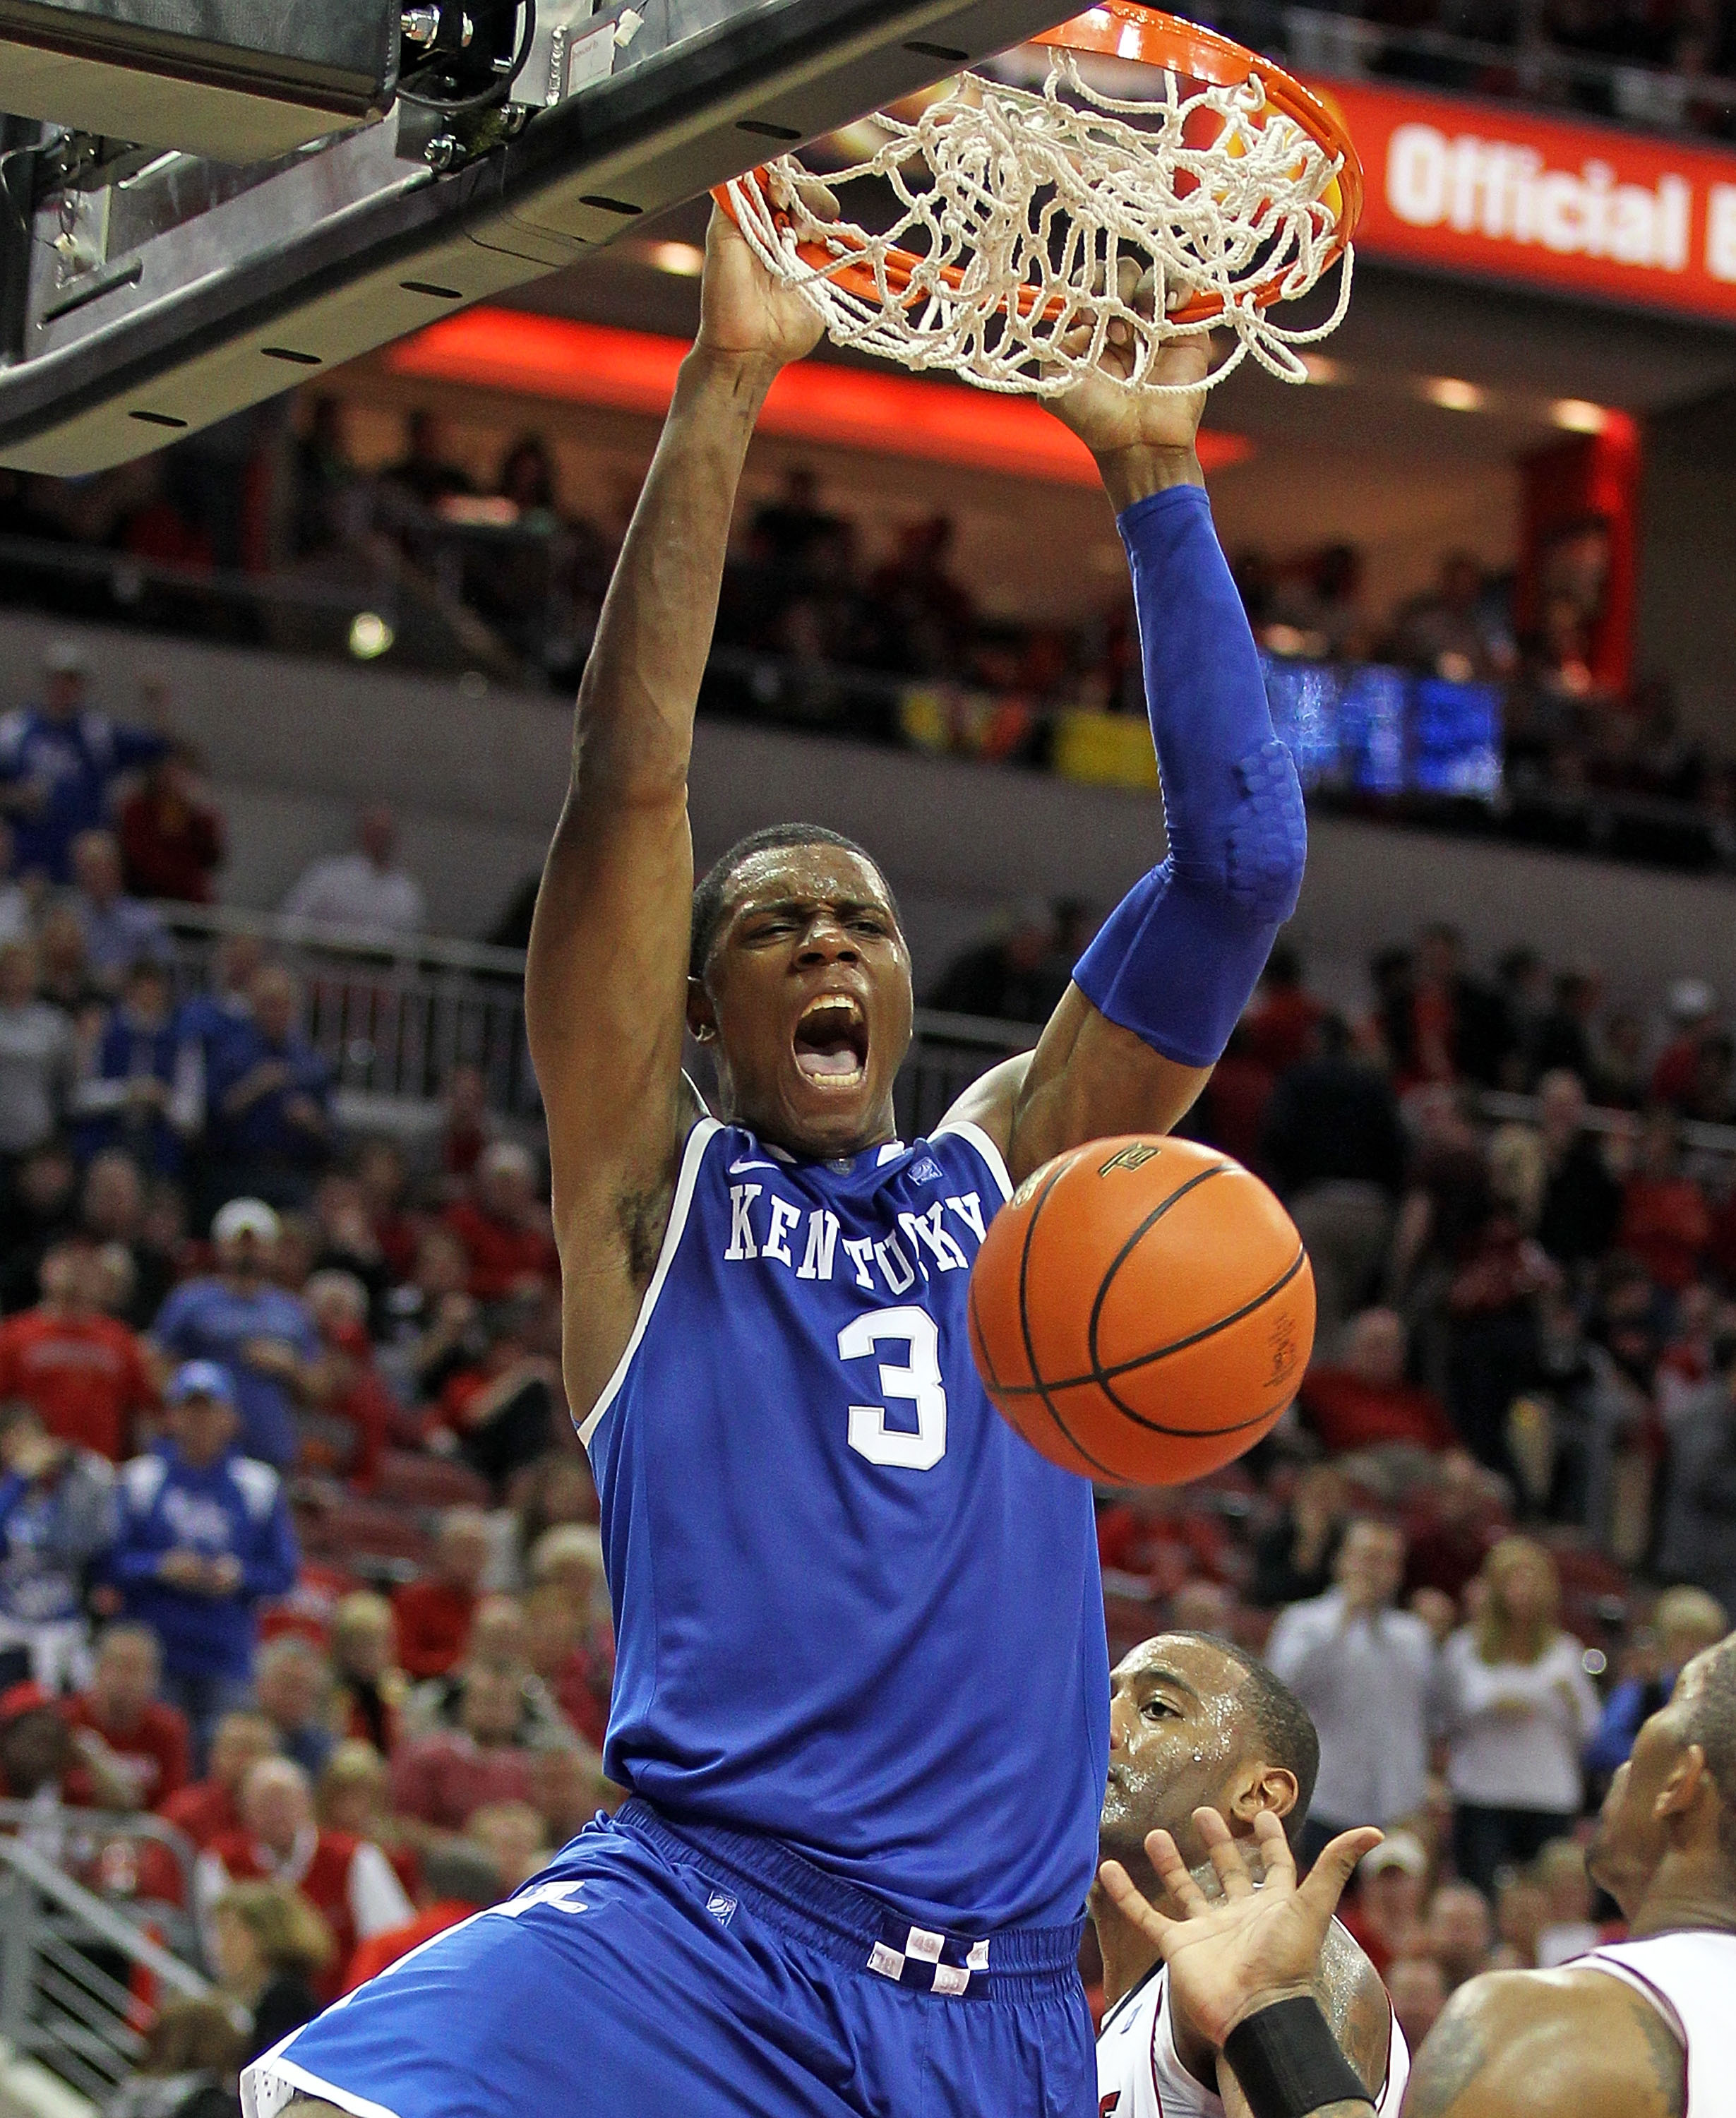 LOUISVILLE, KY - DECEMBER 31: Terrence Jones #3 of the Kentucky Wildcats dunks the ball during the game against the Louisville Cardinals at the KFC Yum! Center on December 31, 2010 in Louisville, Kentucky. Kentucky won 78-63.  (Photo by Andy Lyons/Getty I